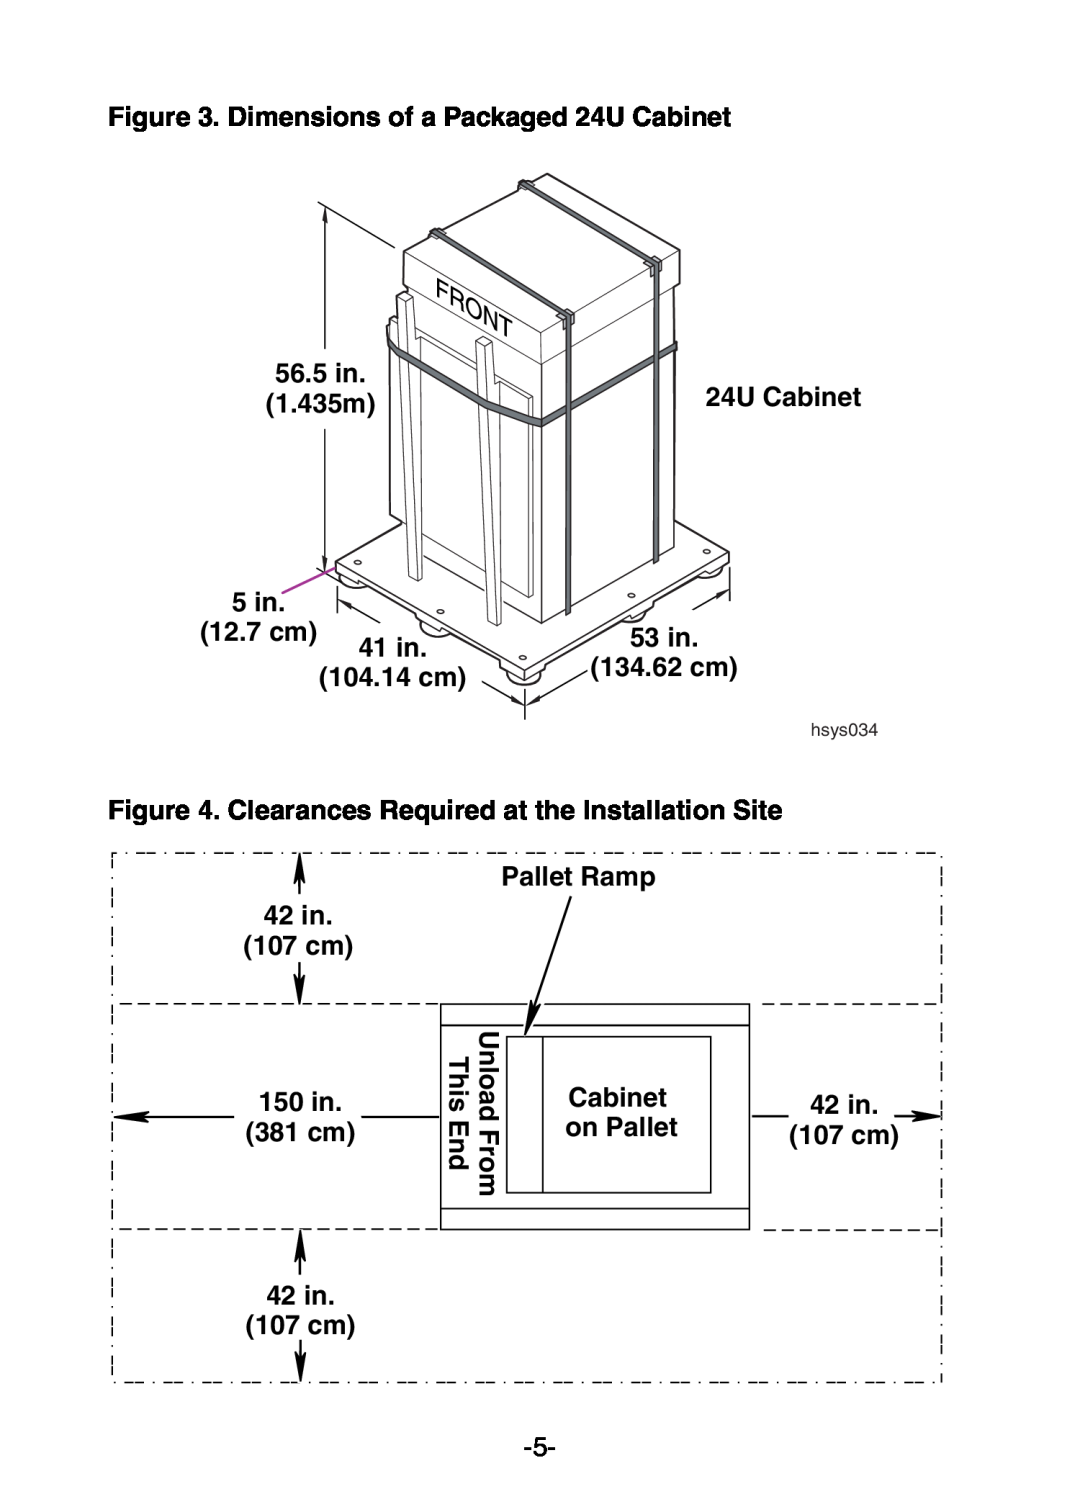 NEC 5800/320Fd manual Dimensions of a Packaged 24U Cabinet 